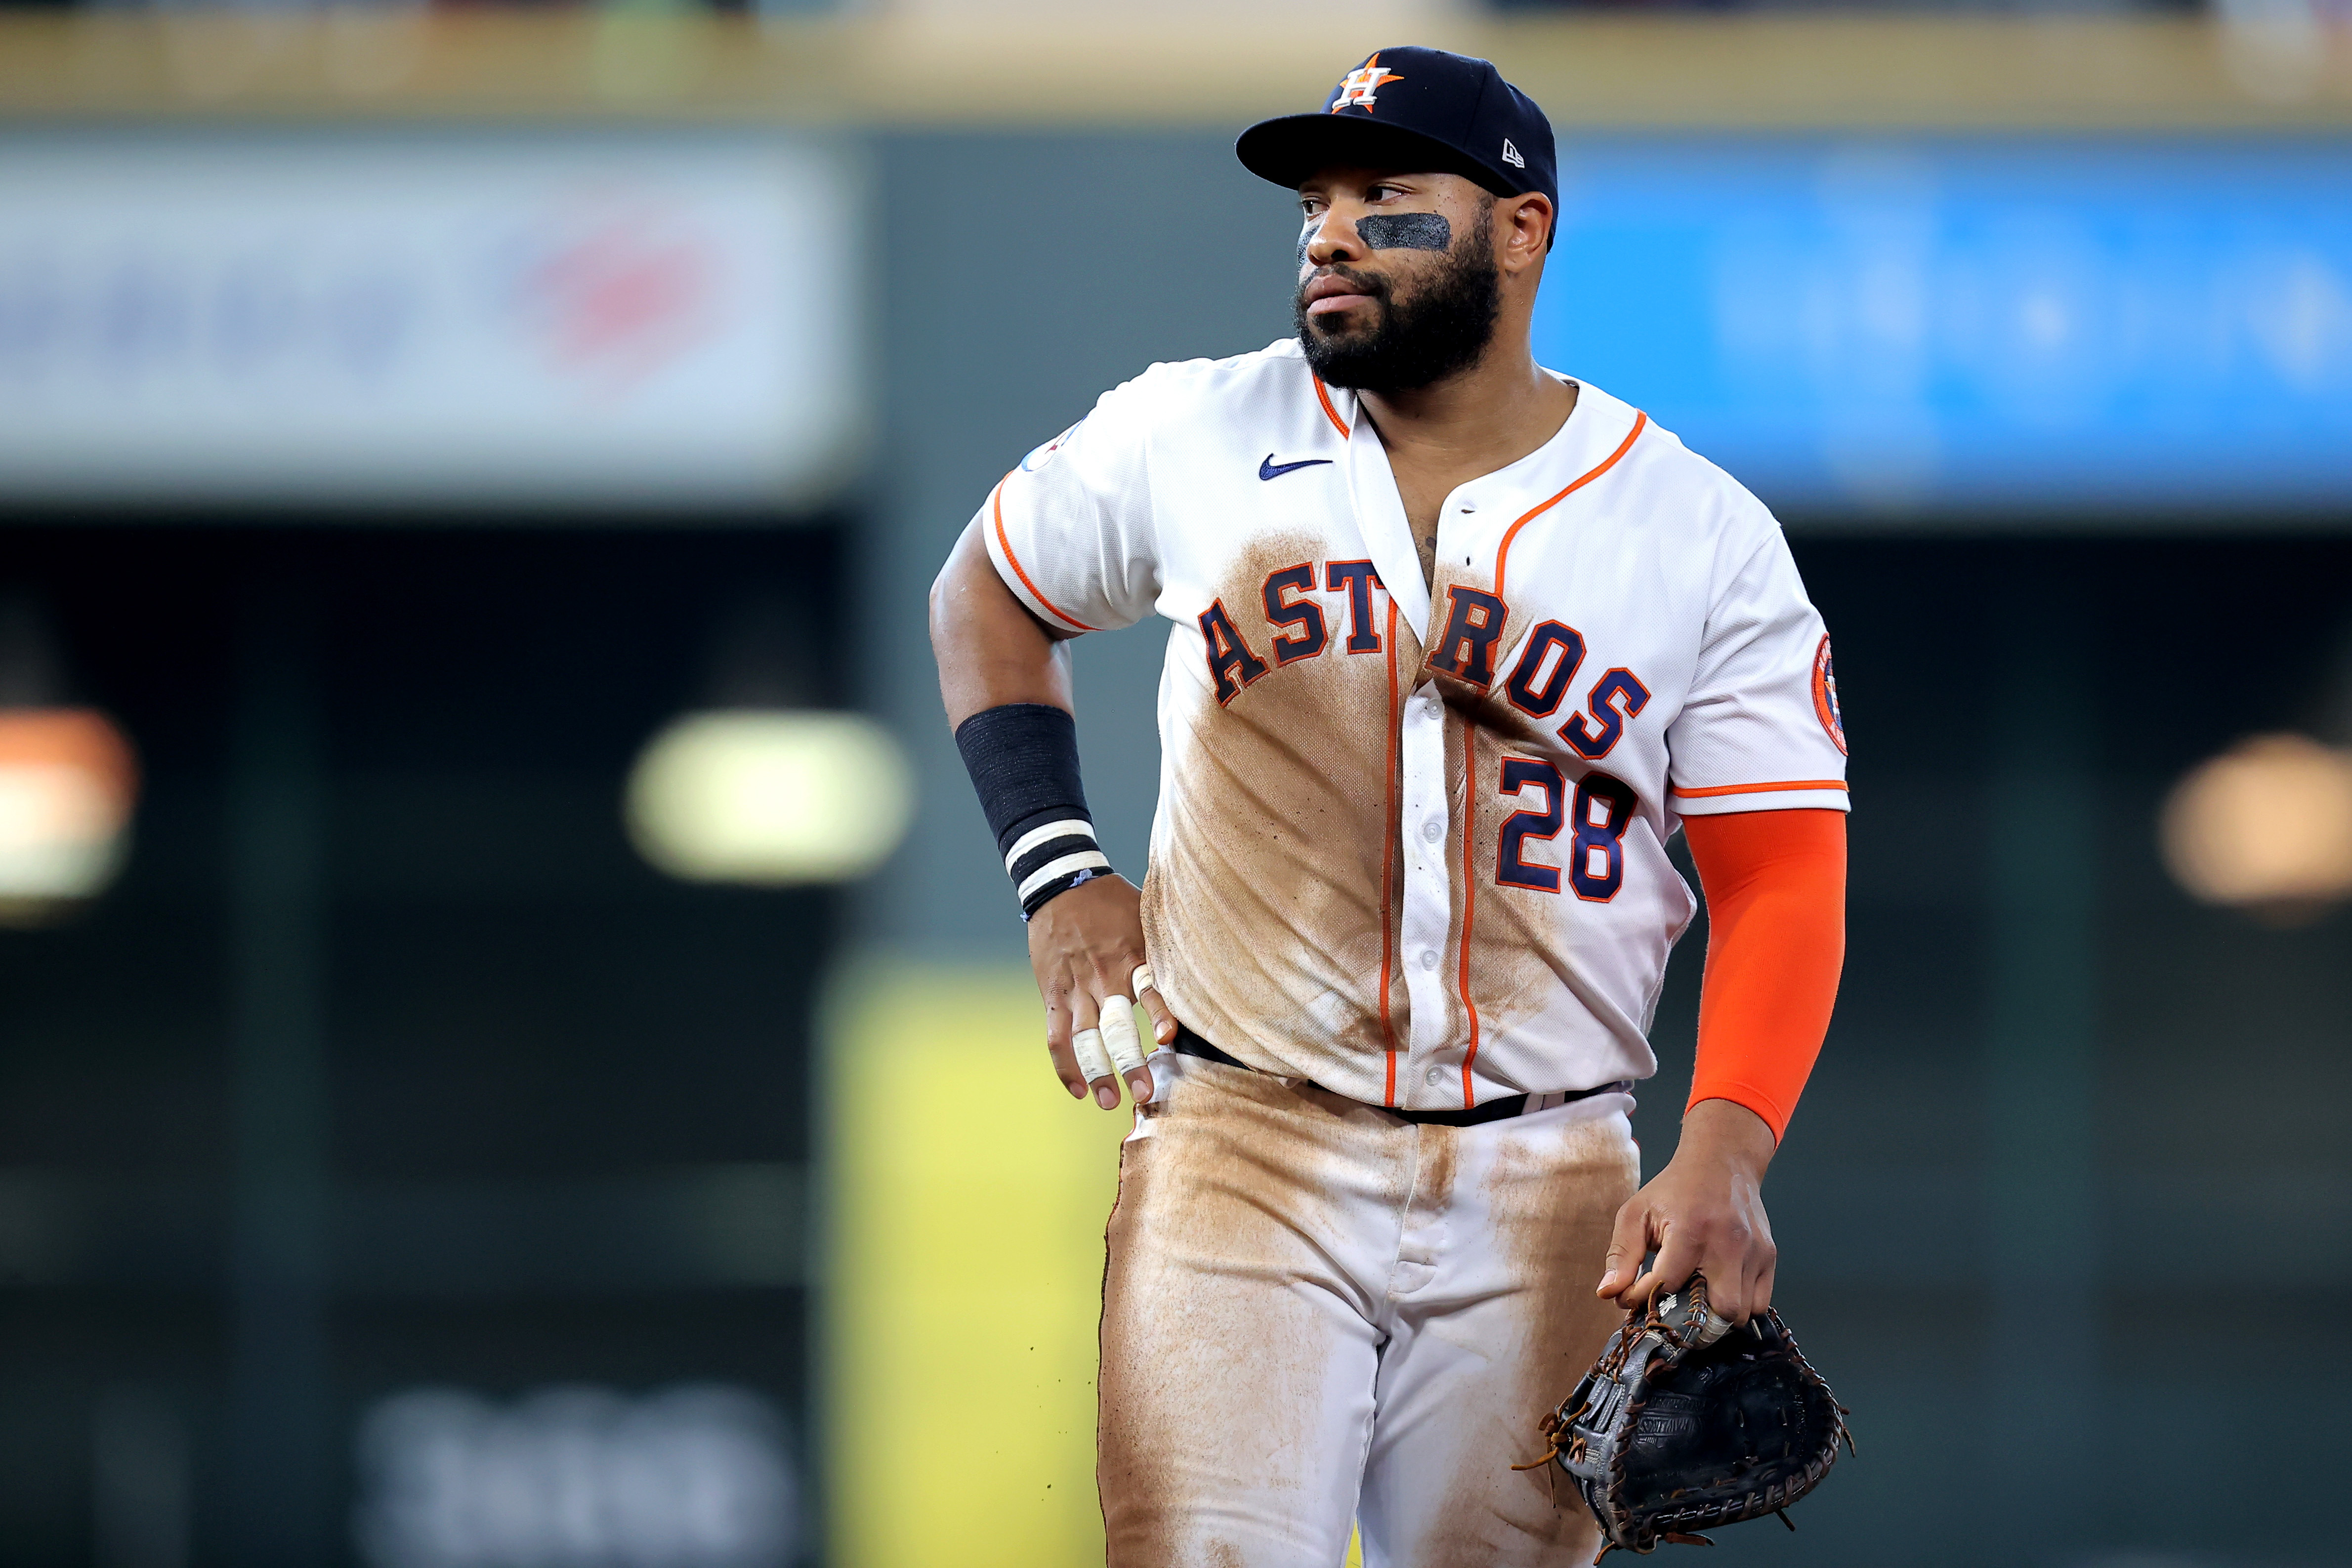 Houston, TX, USA. 17th July, 2015. Houston Astros outfielder L.J. Hoes #0  swings for an RBI single to right field during the MLB baseball game  between the Houston Astros and the Texas